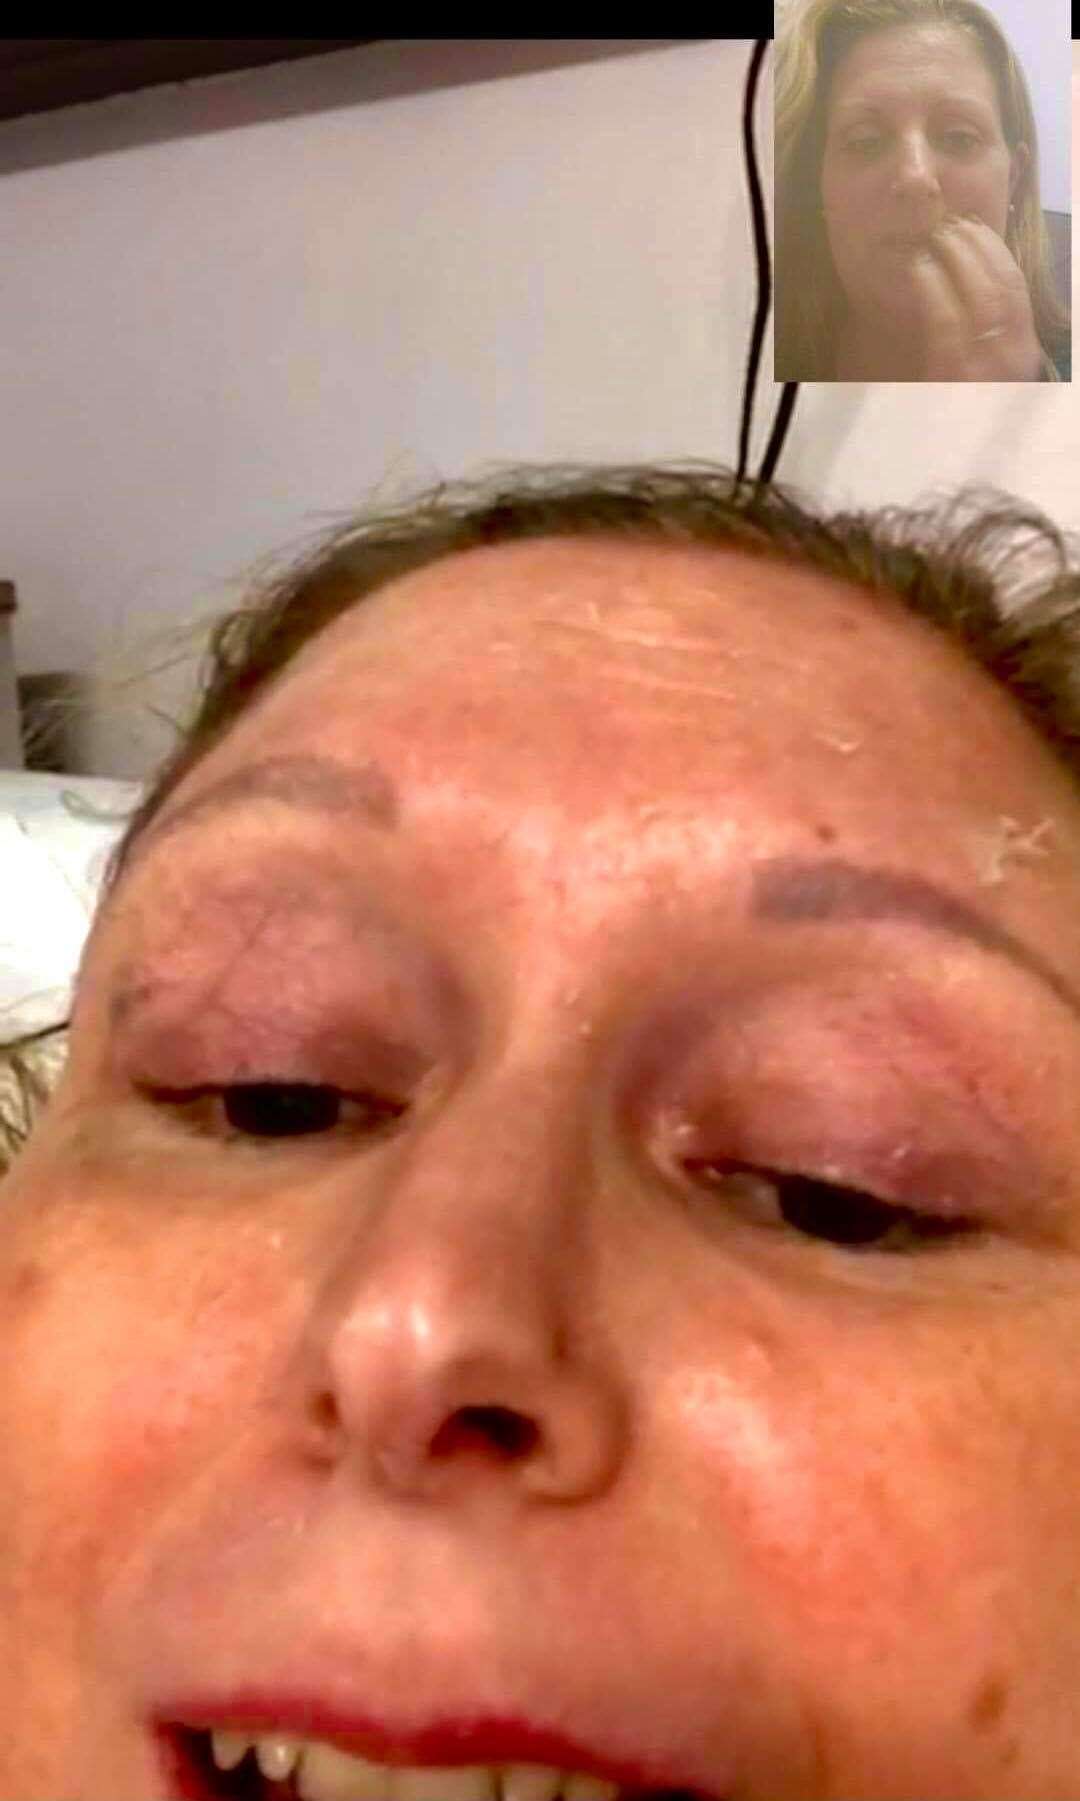 Kelly, video calling her sister, Louise, whilst in hospital with Covid-19